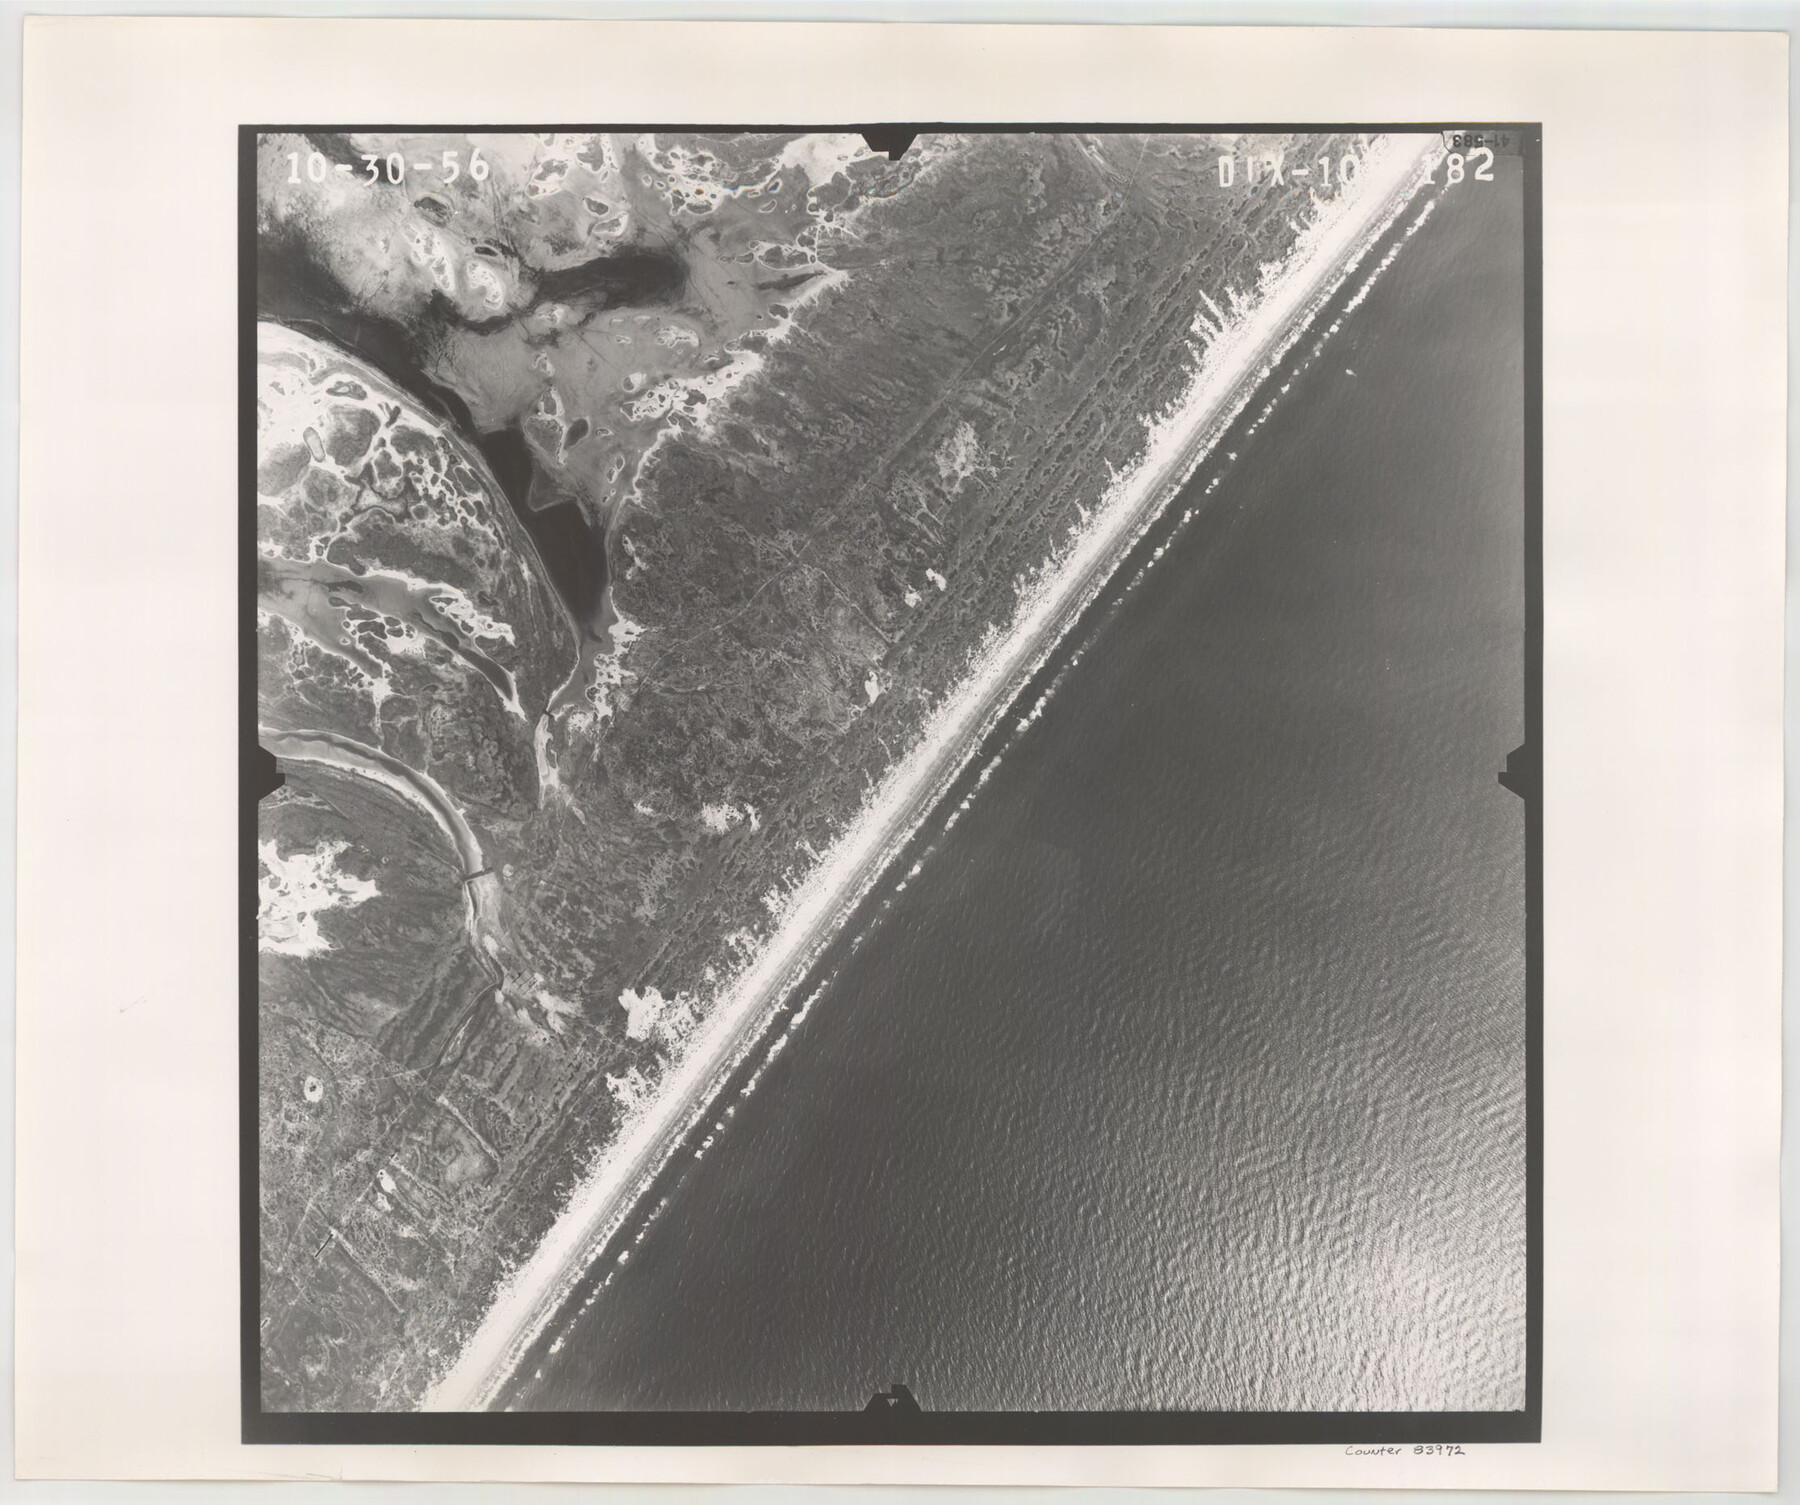 83972, Flight Mission No. DIX-10P, Frame 182, Aransas County, General Map Collection